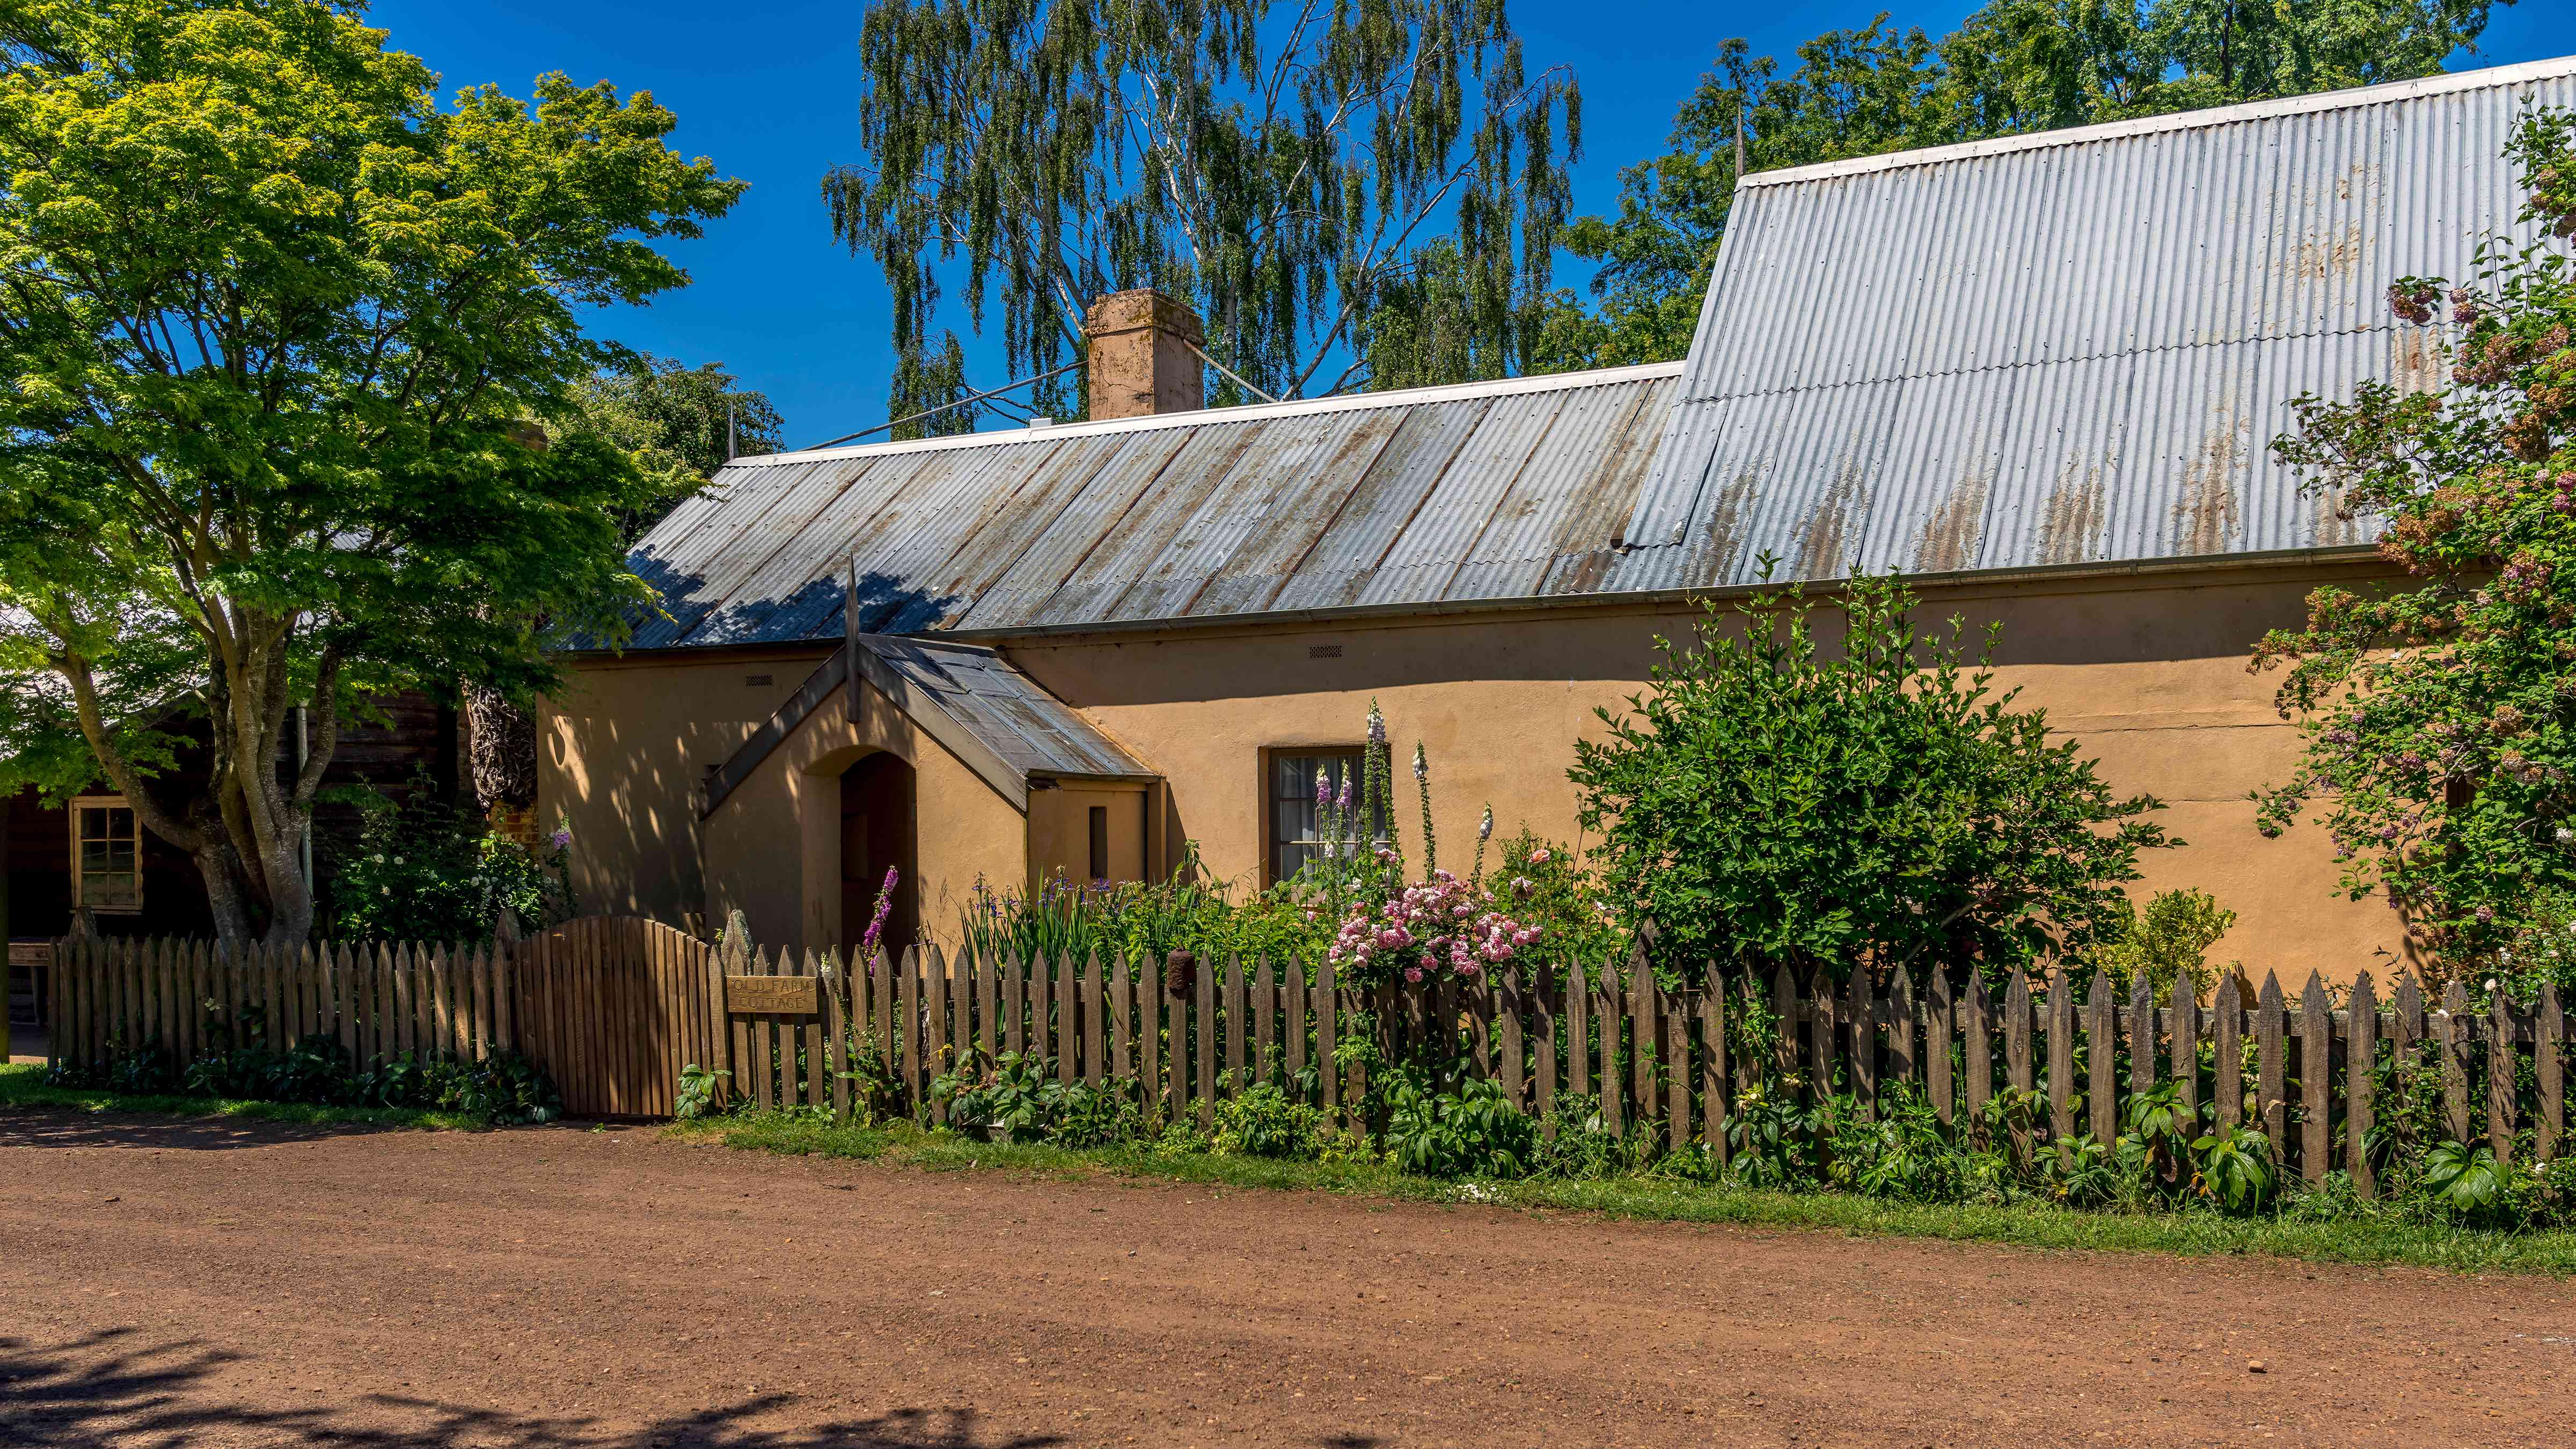 Light pink limewashed walls with a porch and window are partially obscured by a cottage style garden and a timber picket fence. The roof is pitched and has aged corrugated iron. A tree stands to the left of the image and a gravel road in the foreground. Photo: Rob Burnett.